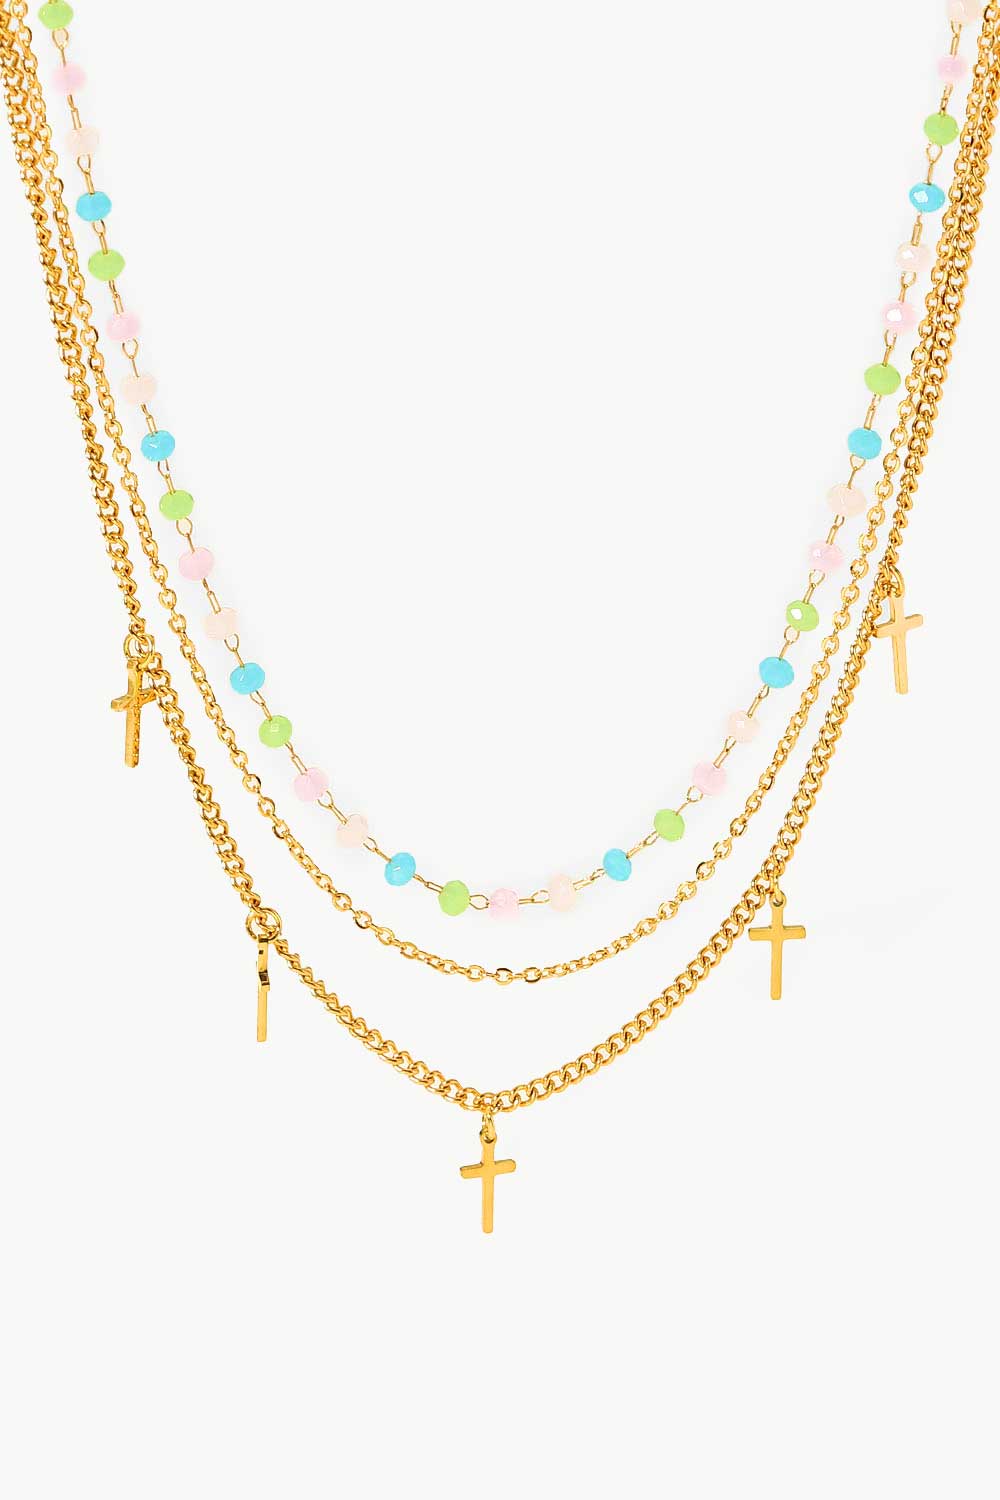 18K Gold Plated Cross Pendant Triple-Layered Necklace - Necklaces - FITGGINS